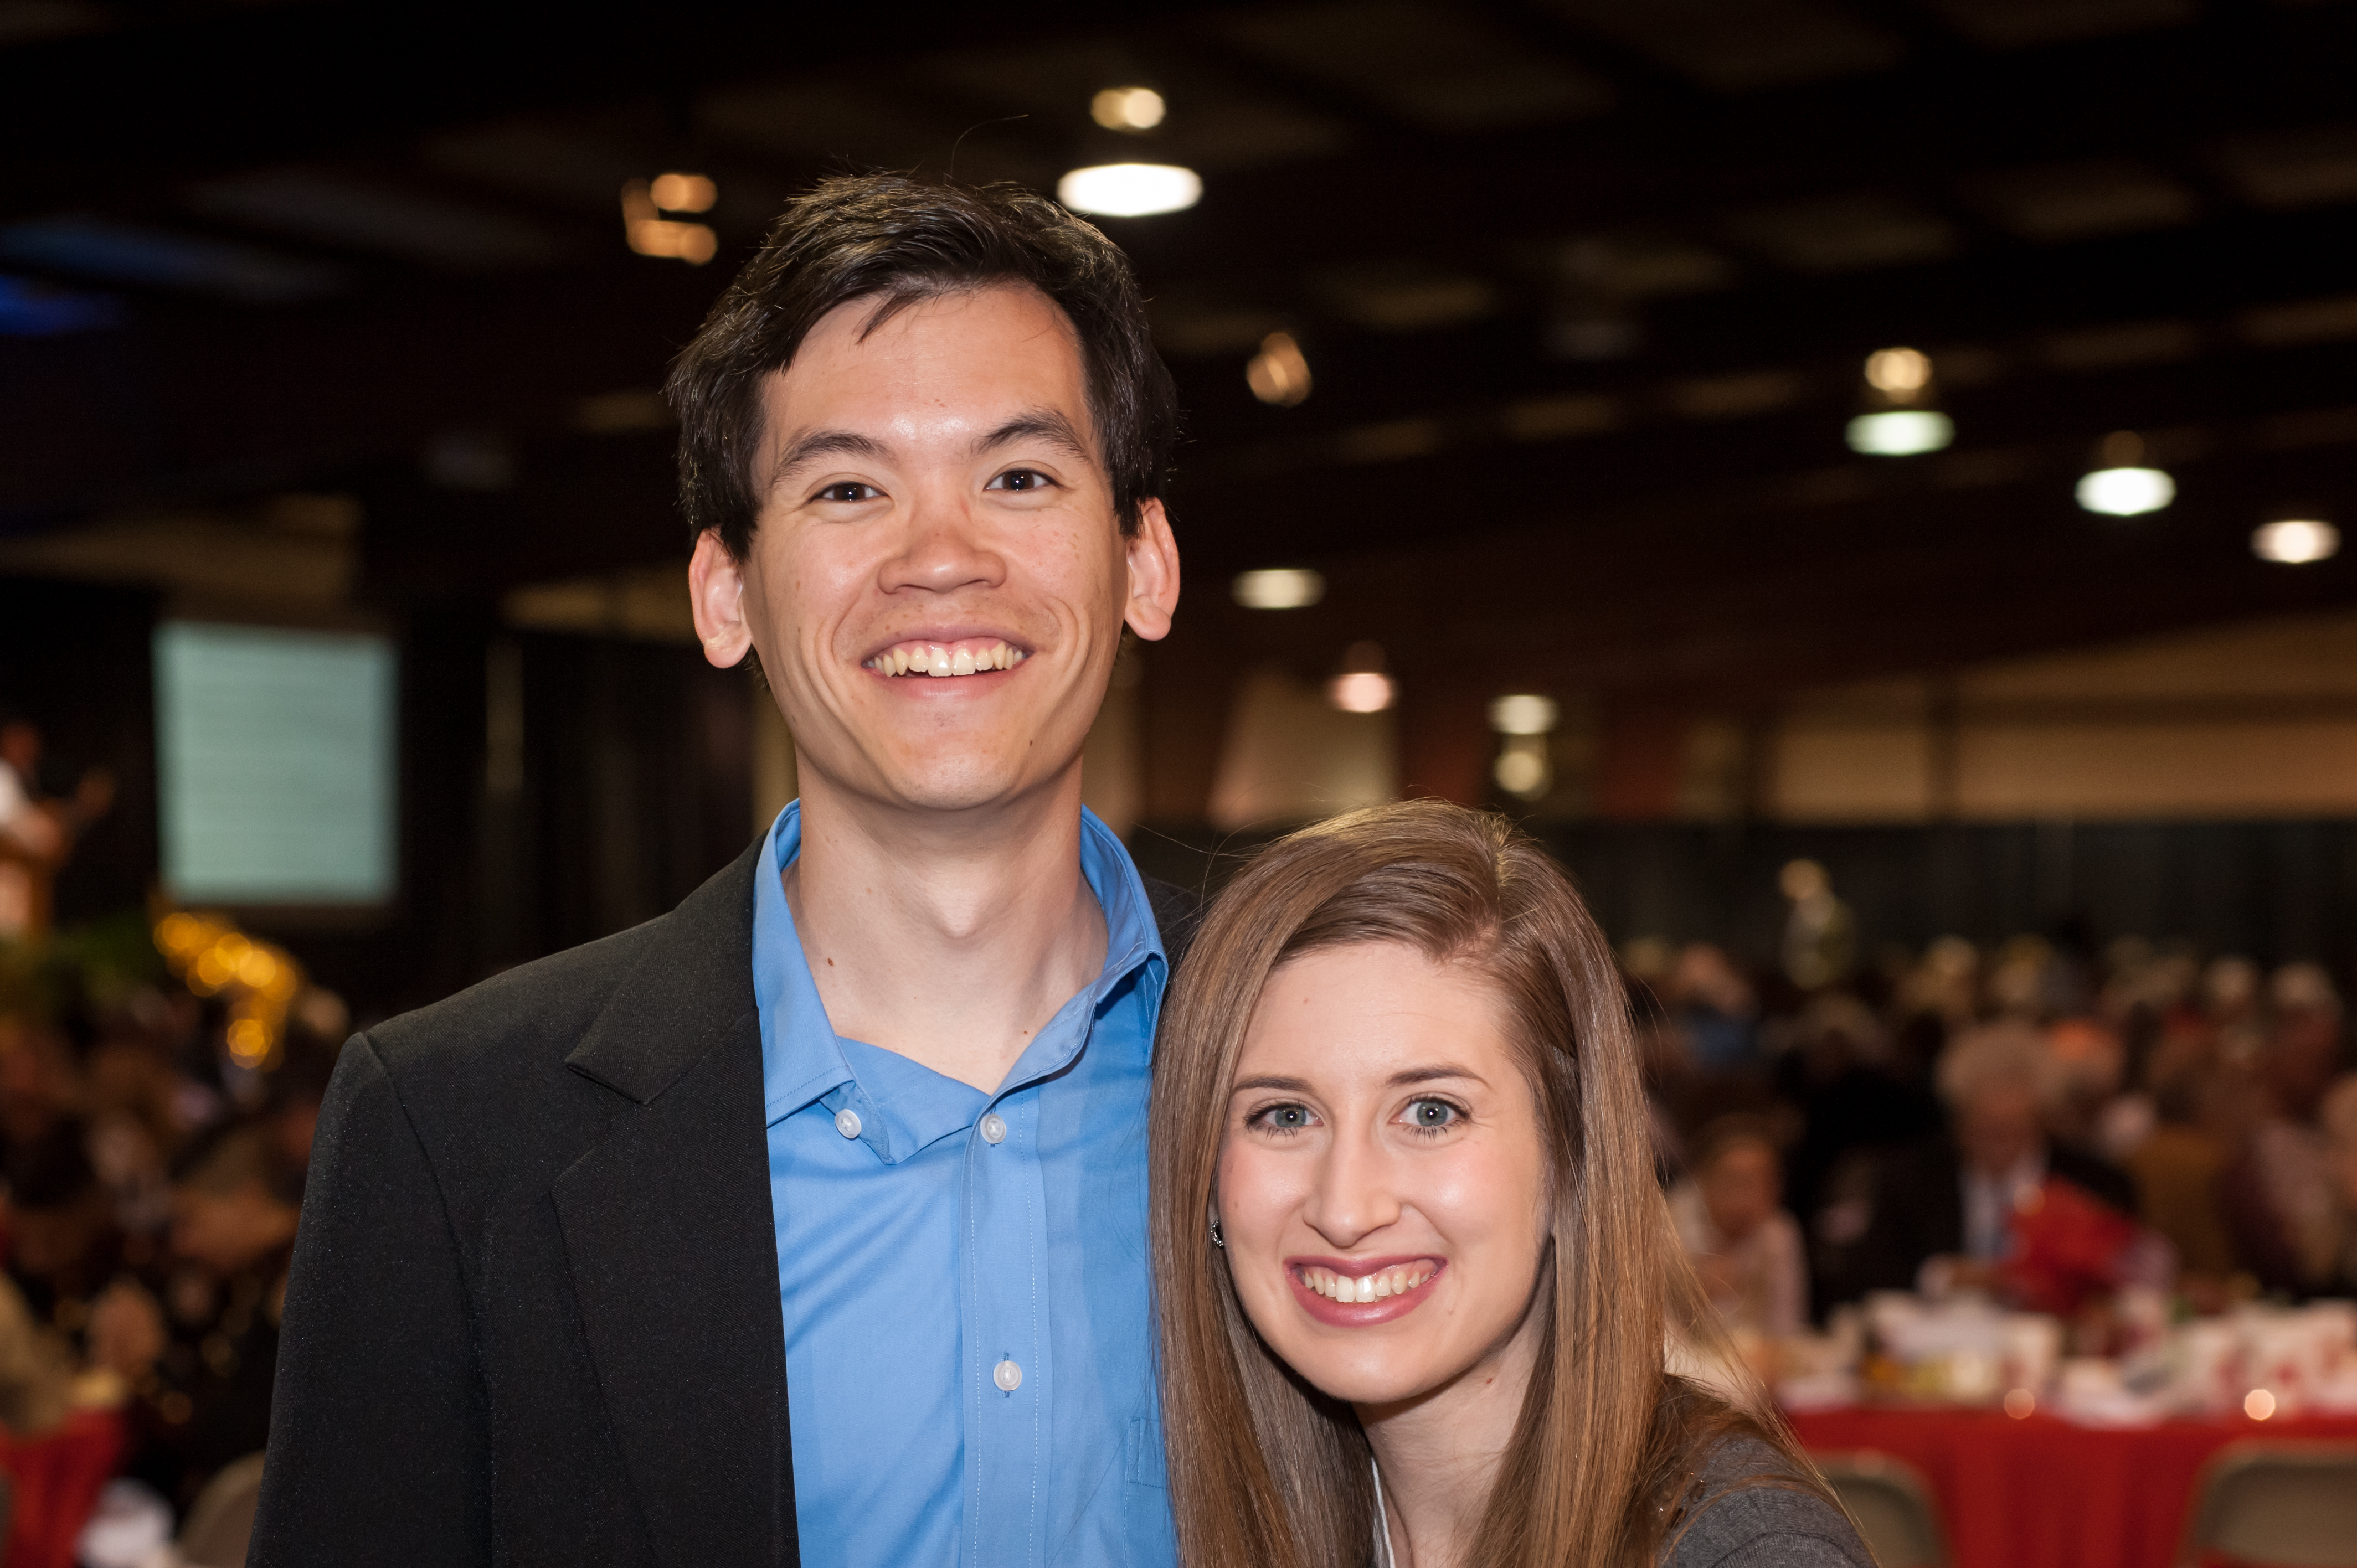 Shaie Williams for AGN Media. Paul and Sarah Hastings at the Texas Panhandle Lincoln-Reagan Day Dinner hosted by the local Republican party groups held at The Rex Baxter Building in Amarillo, TX on January 29, 2016